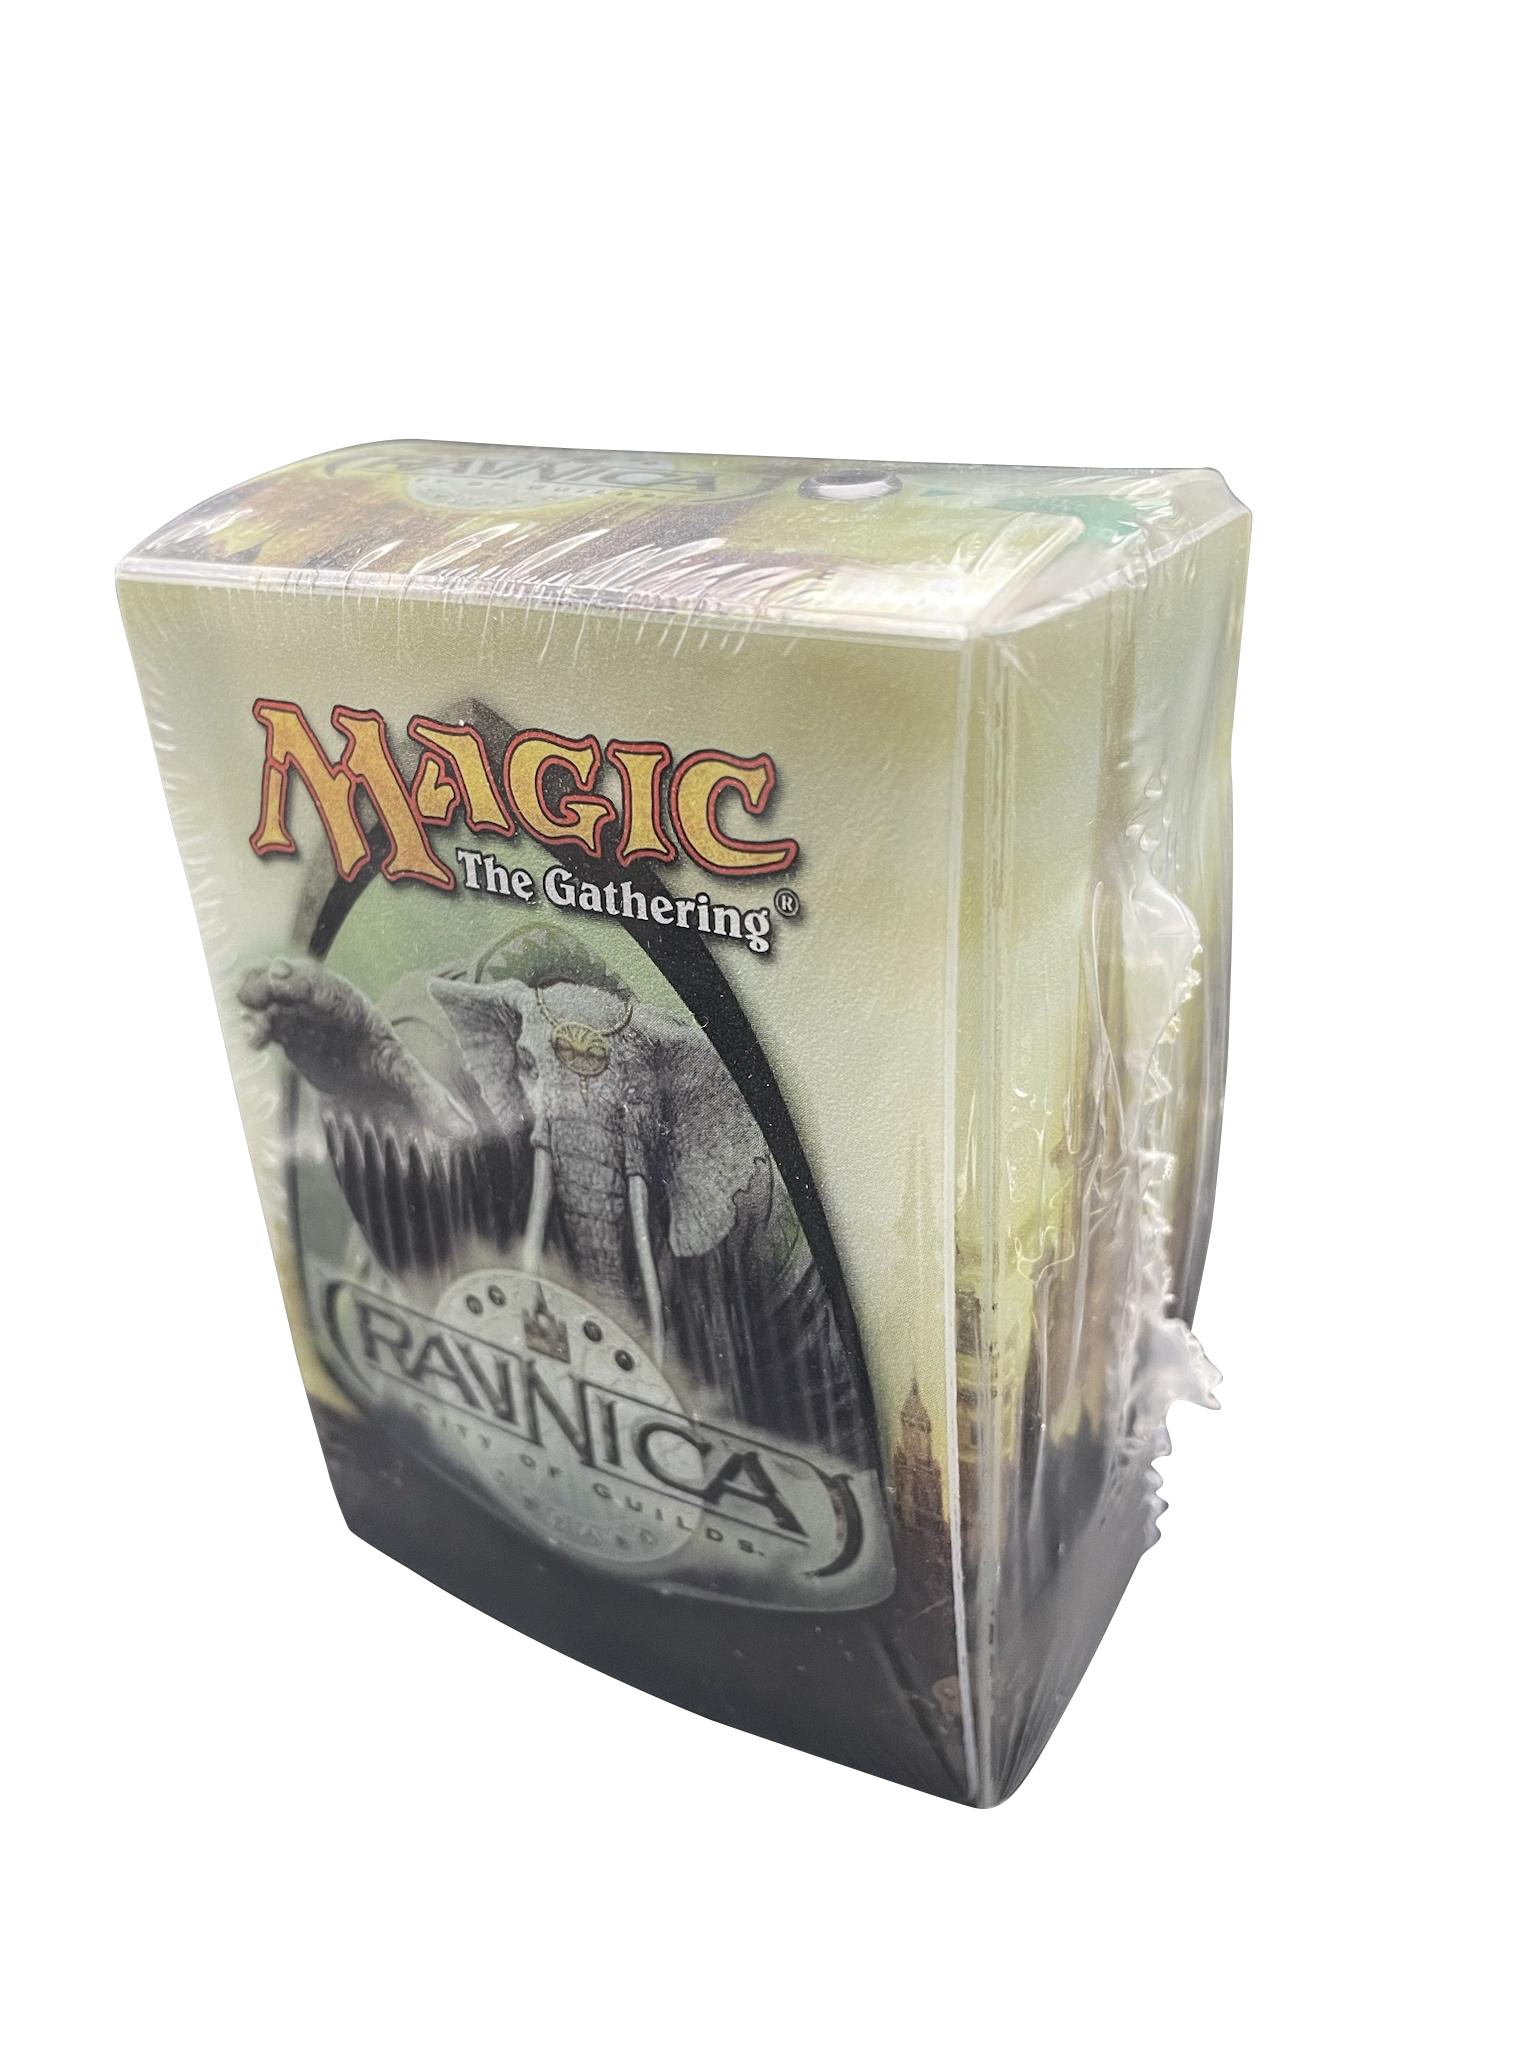 Magic the Gathering Ravnica: City of Guilds: Loxodon/Firemane Deck Box Englisch